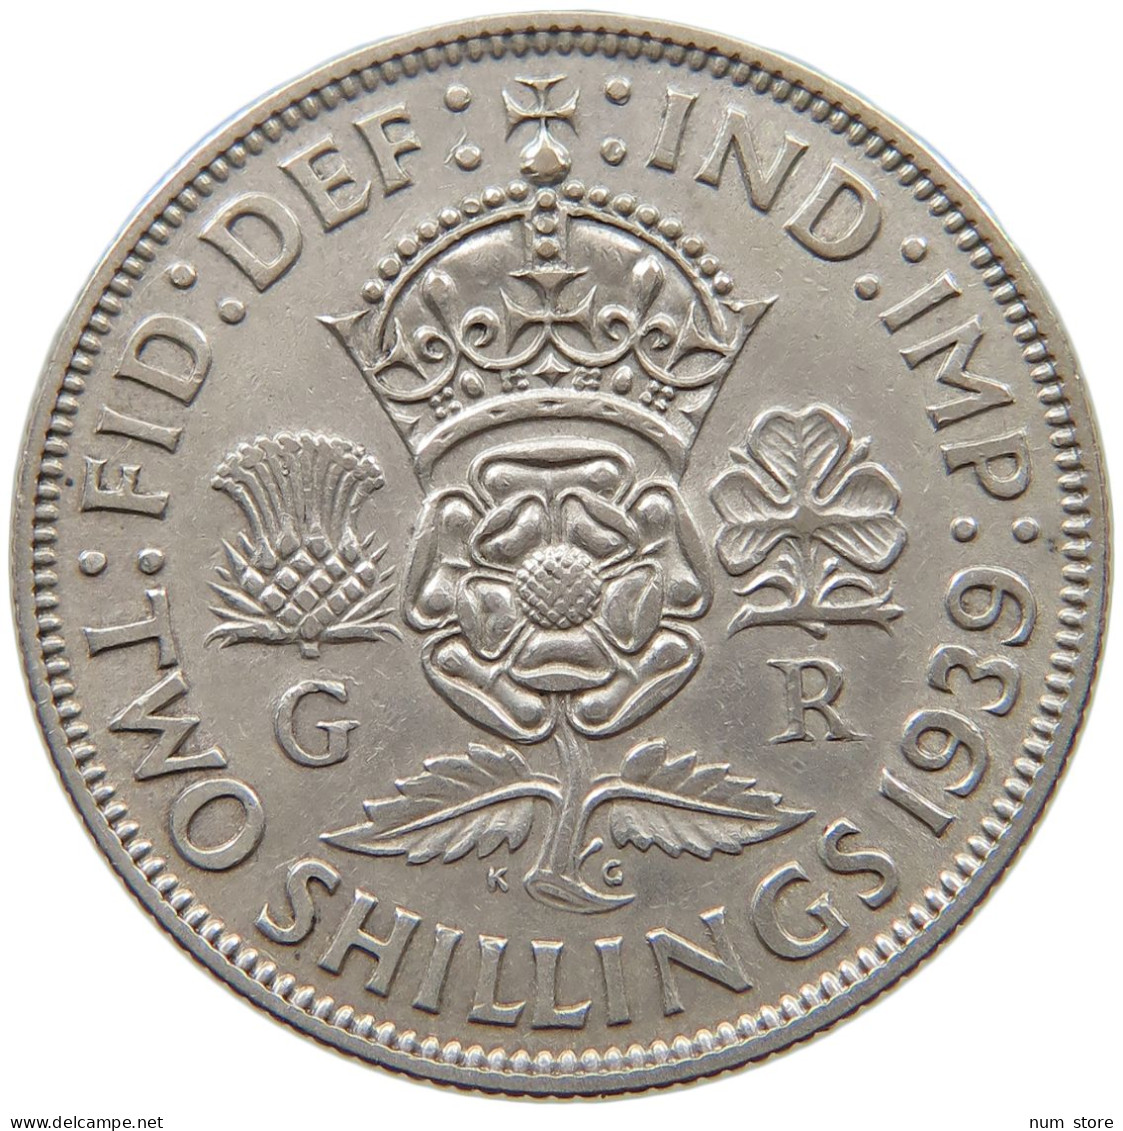 GREAT BRITAIN TWO SHILLINGS 1939 George VI. (1936-1952) #a090 0697 - J. 1 Florin / 2 Schillings